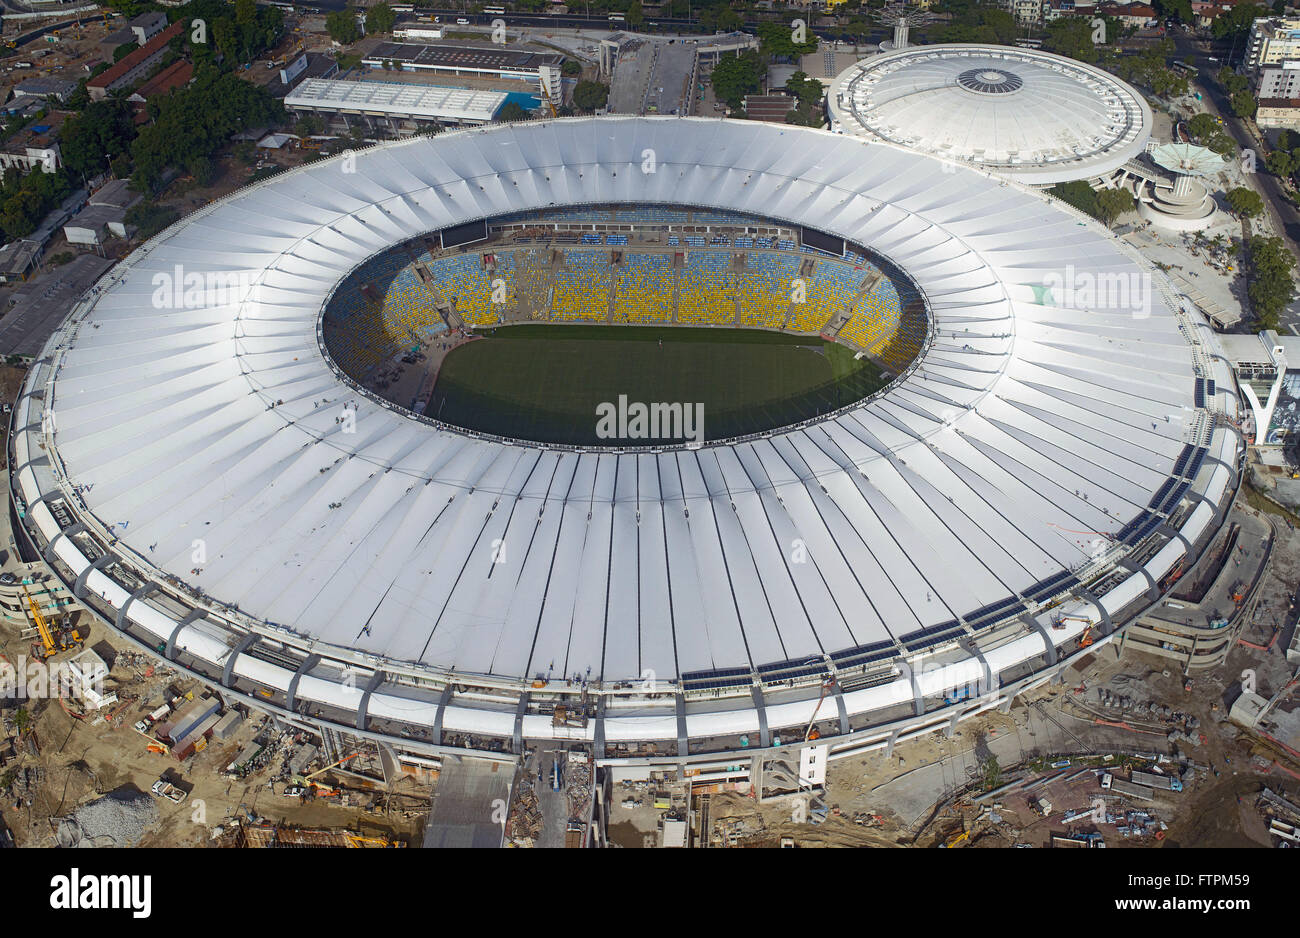 Aerial view of the Maracana Stadium - hosting the World Cup 2014 Stock Photo